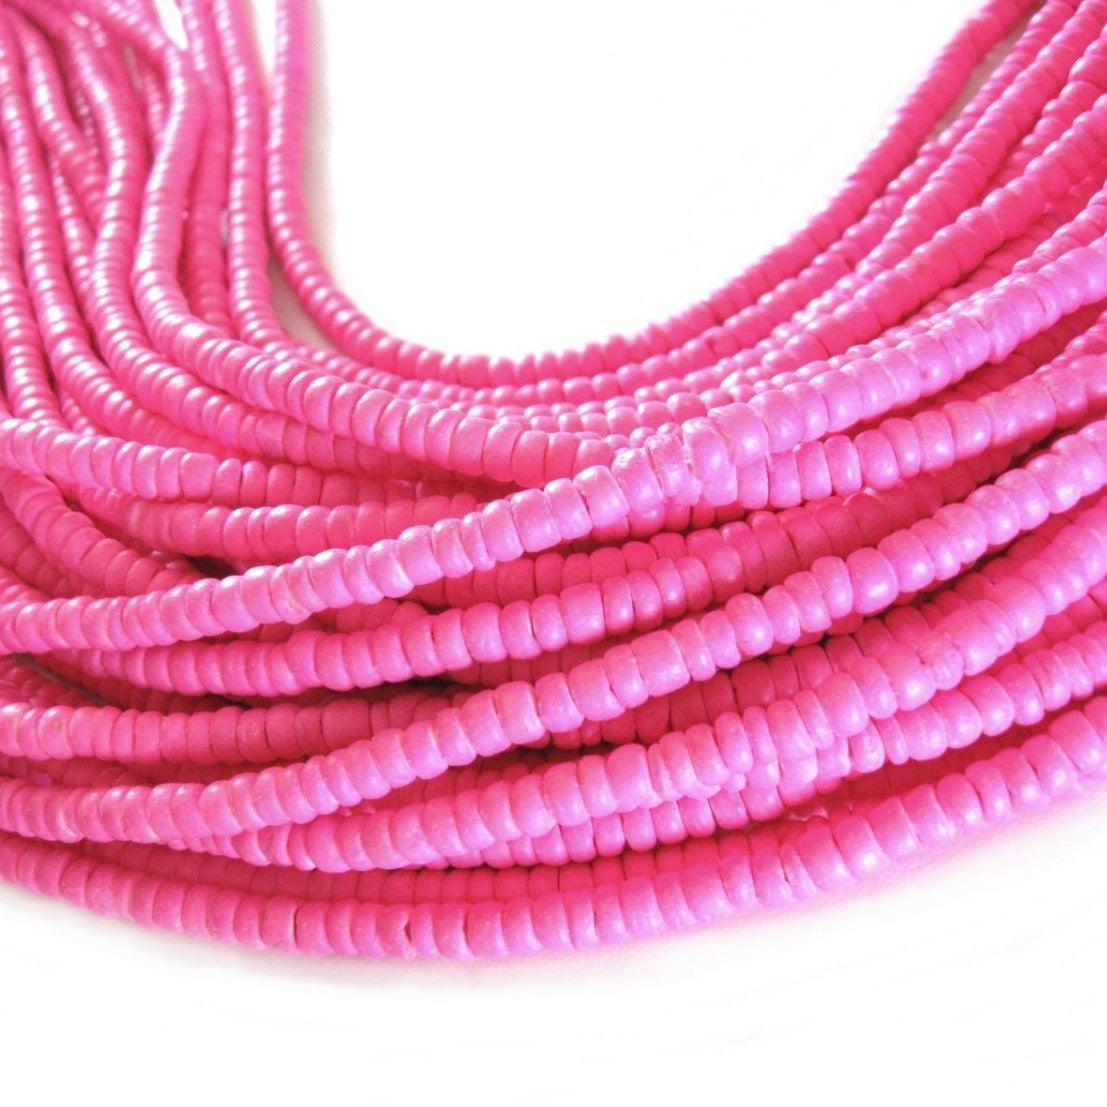 Coconut bead 150 pink wood Beads - Coconut Rondelle Disk Beads 4-5mm